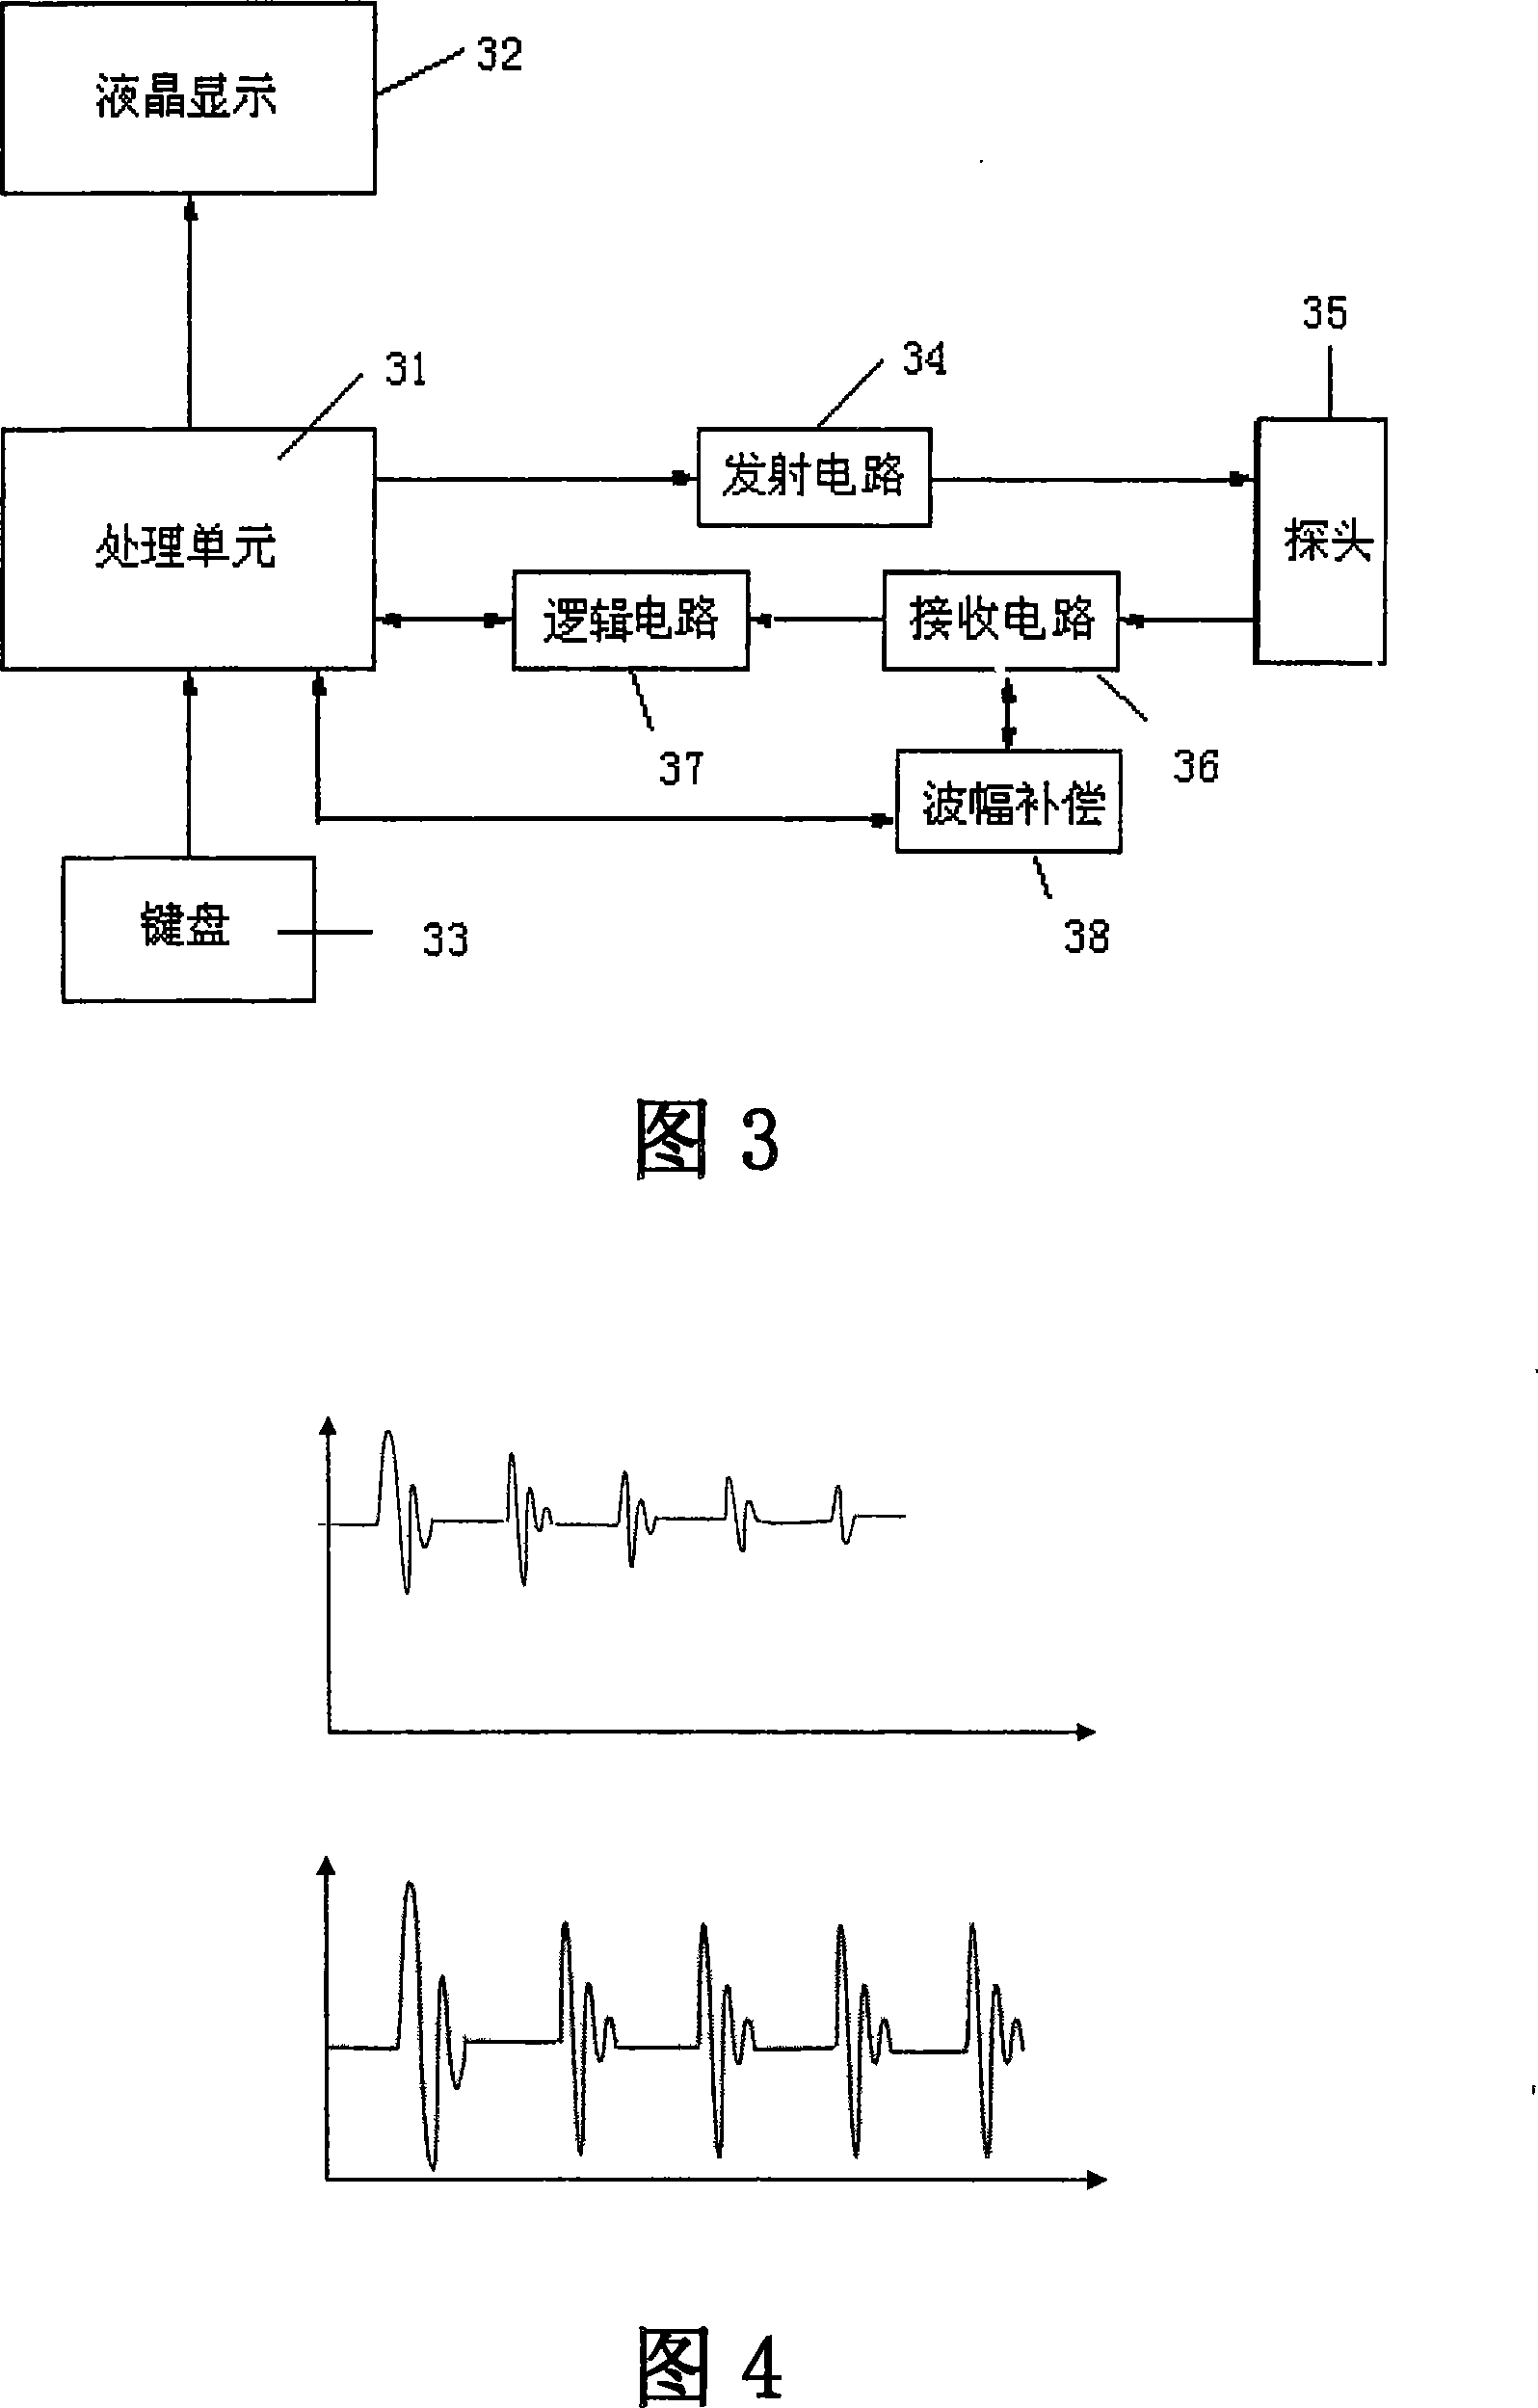 Adjustable automatic wave amplitude gain compensation method and circuit for ultrasonic thickness gauge